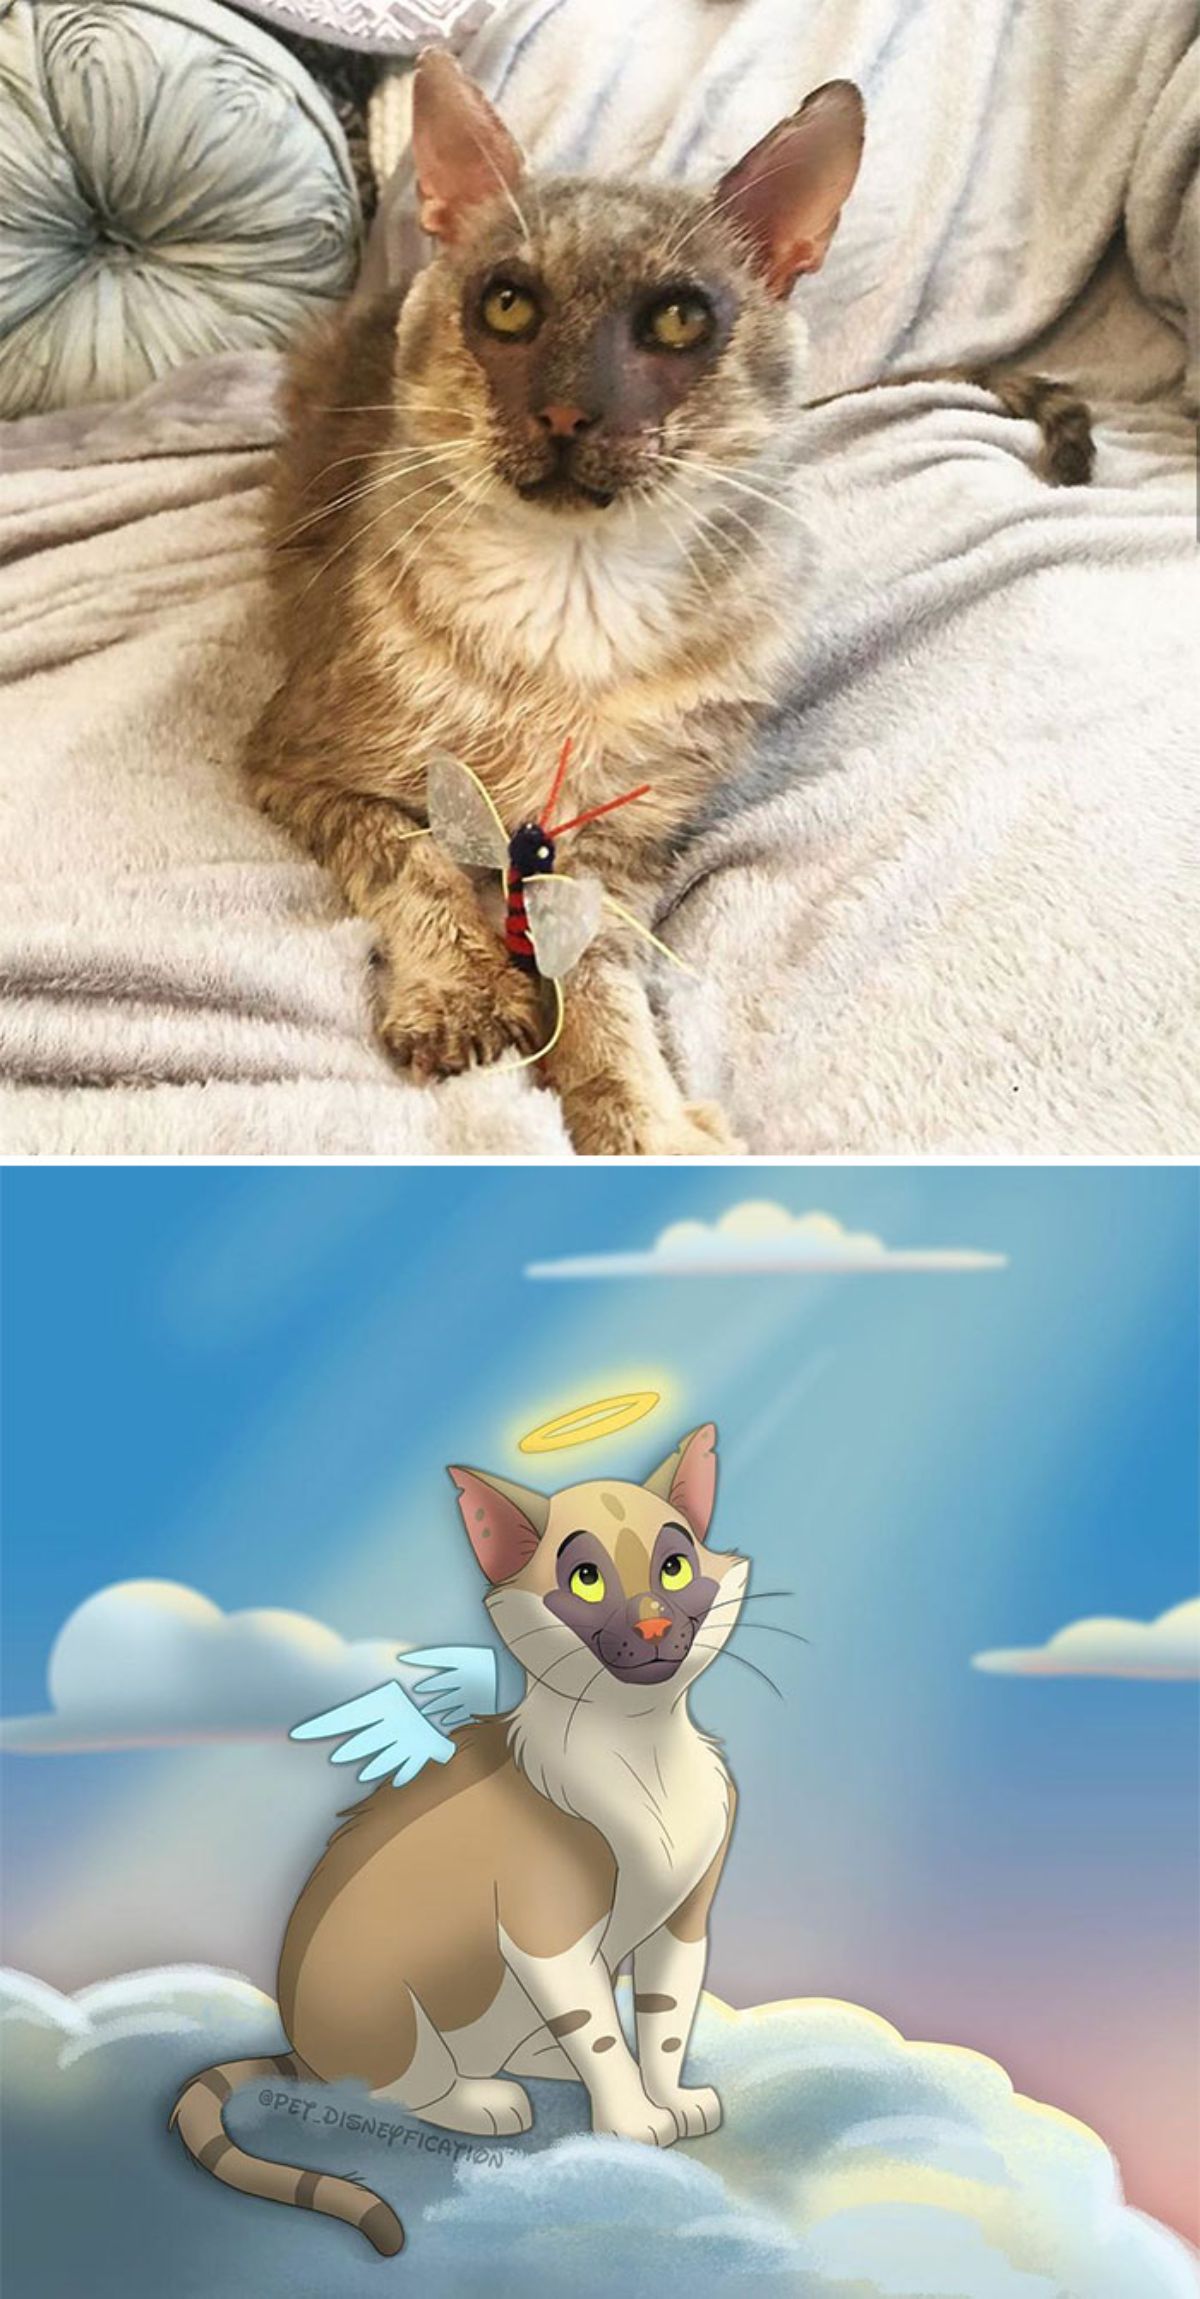 real photo and cartoon image of a brown and white cat with a brown patch on its face laying on a white blanket holding a butterfly toy